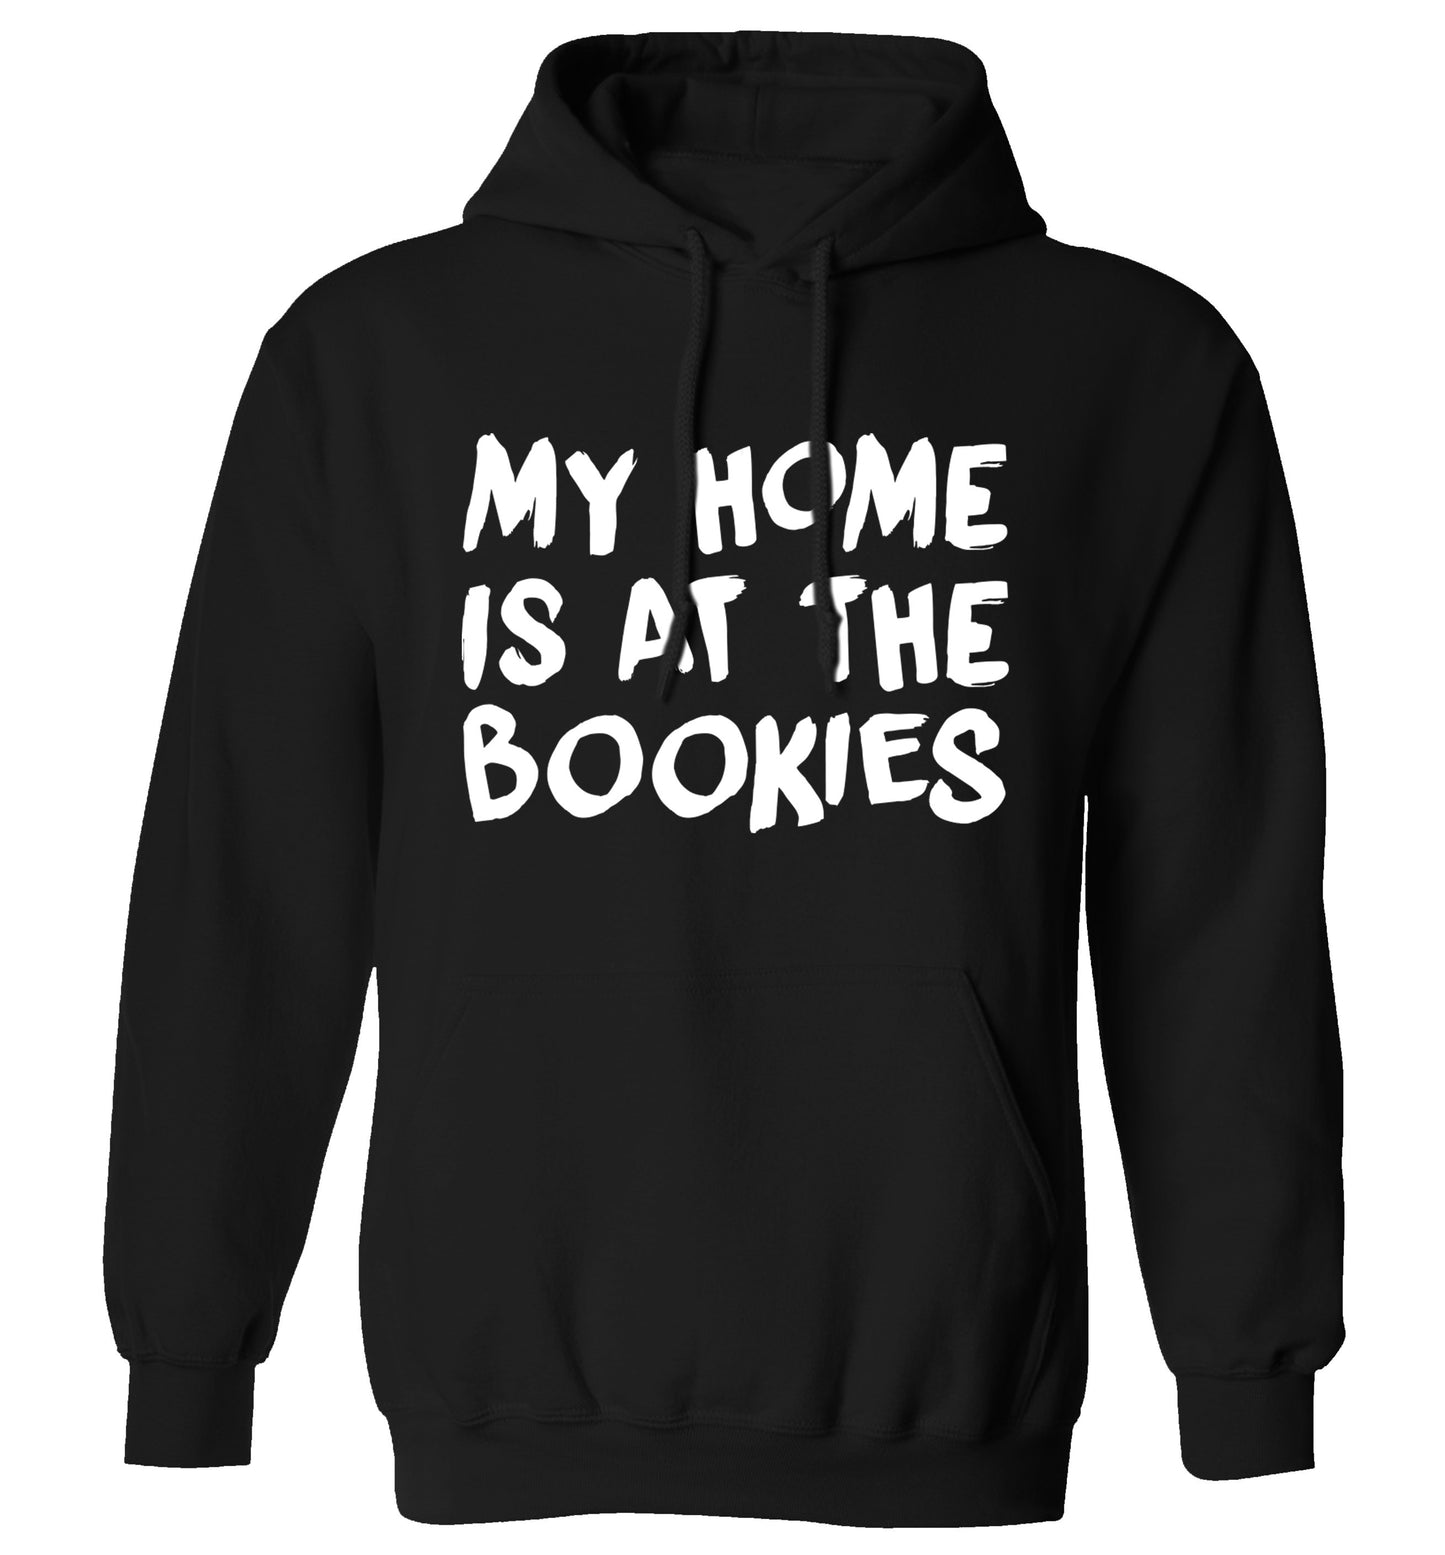 My home is at the bookies adults unisex black hoodie 2XL